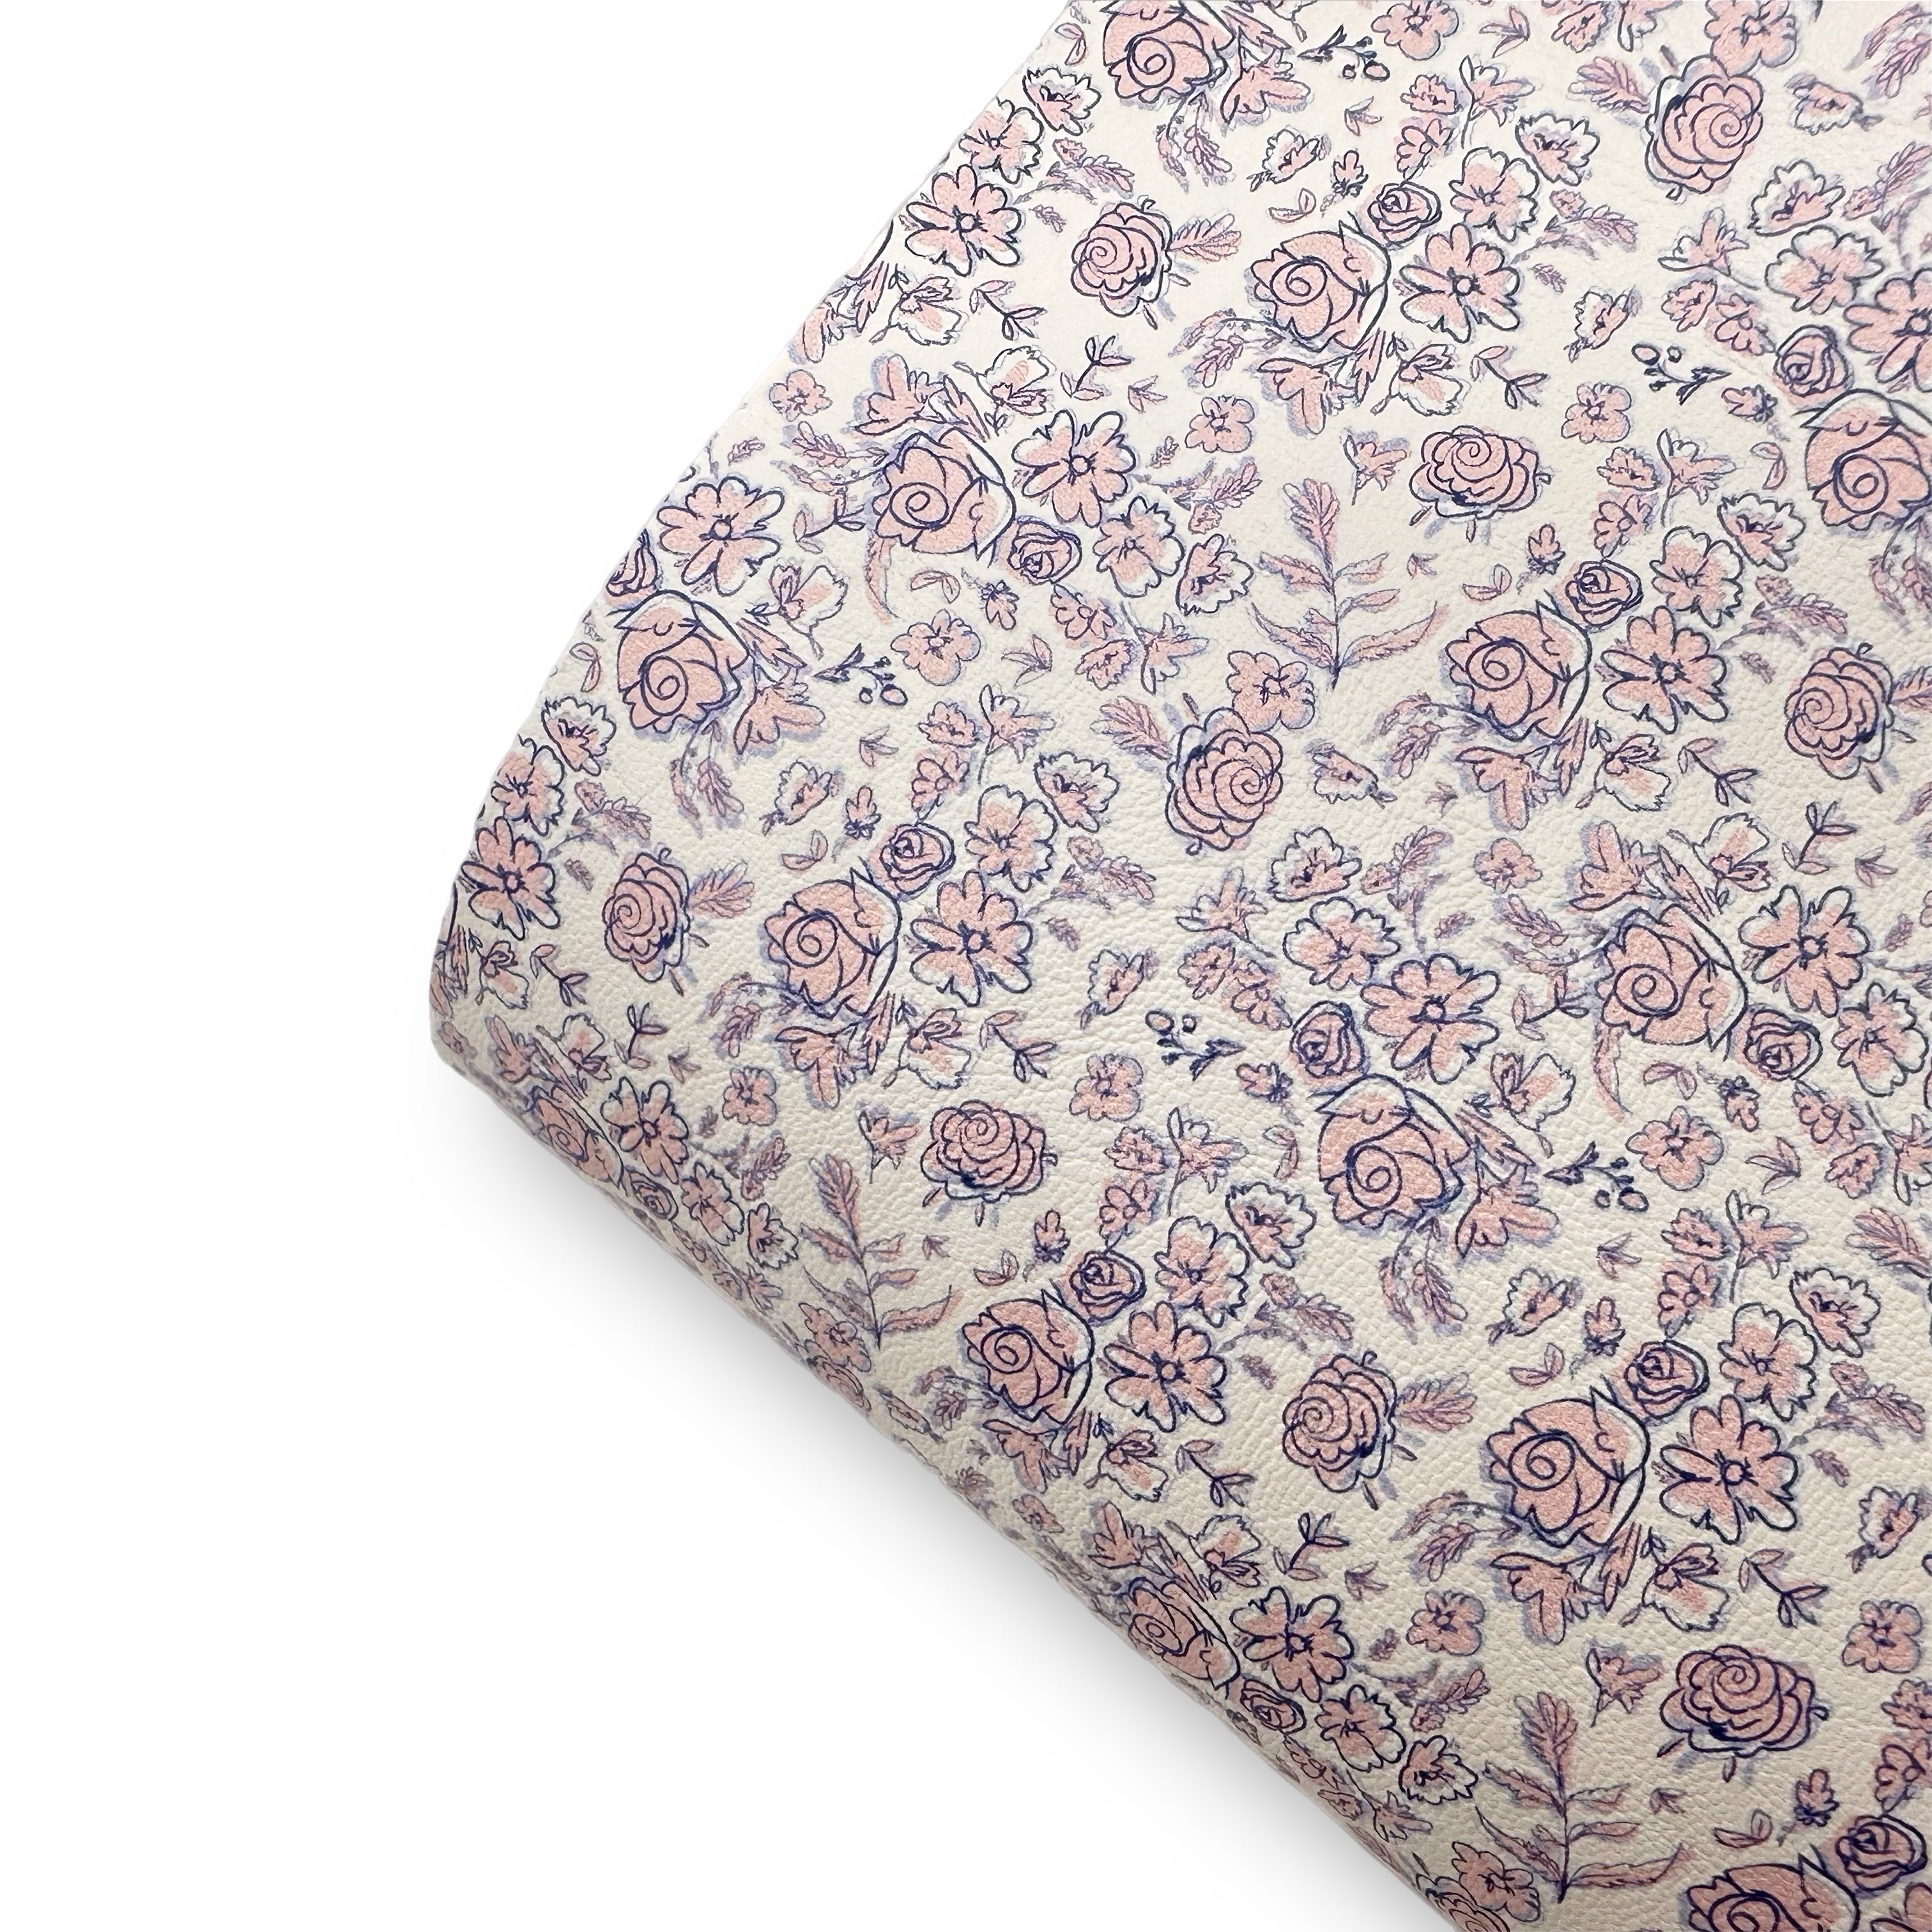 White Bunny Blooms Premium Faux Leather Fabric